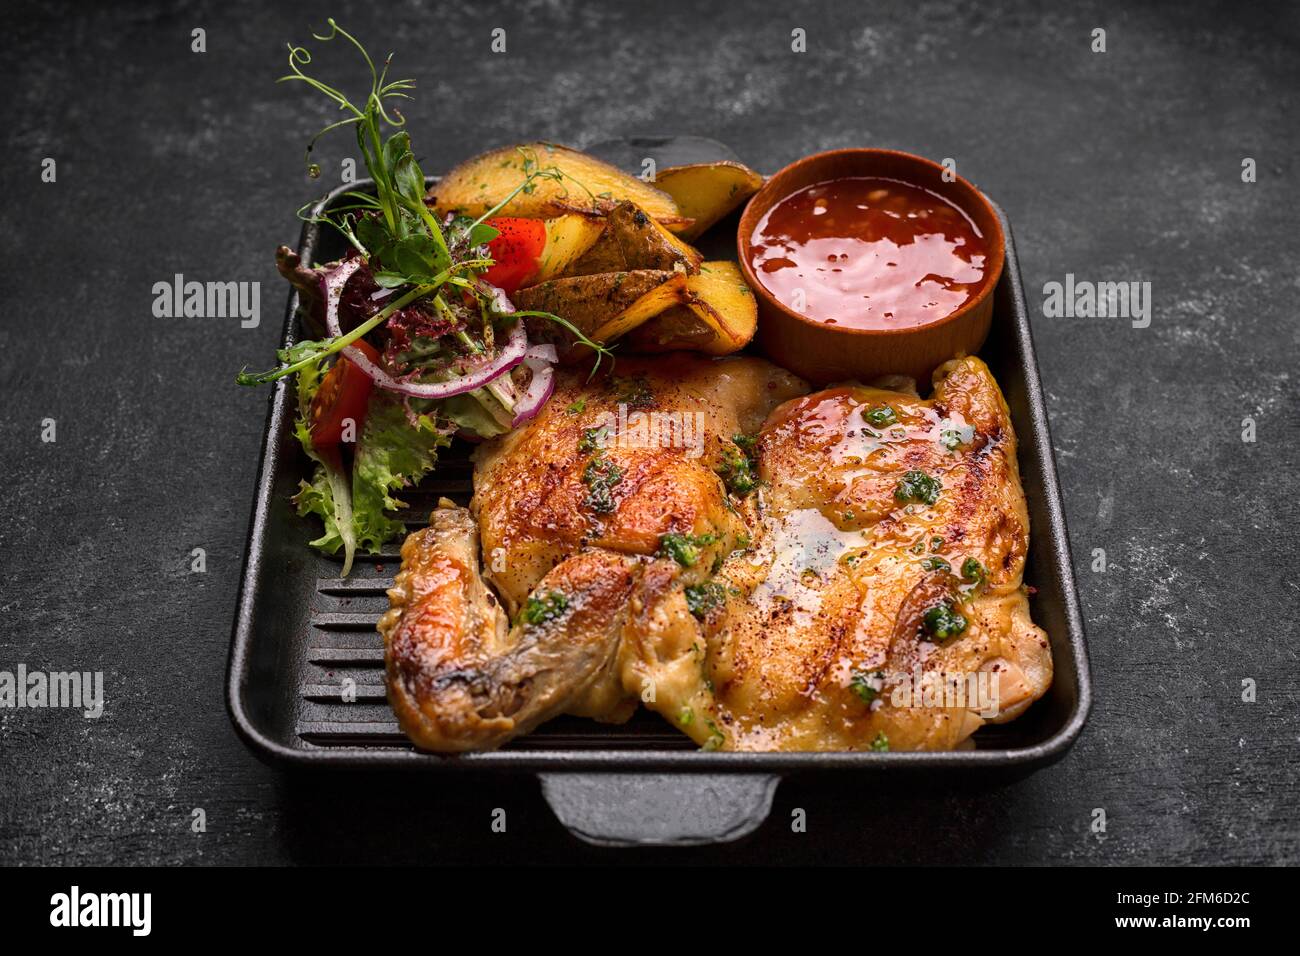 Fried chicken with crispy crust, potatoes and sauce Stock Photo